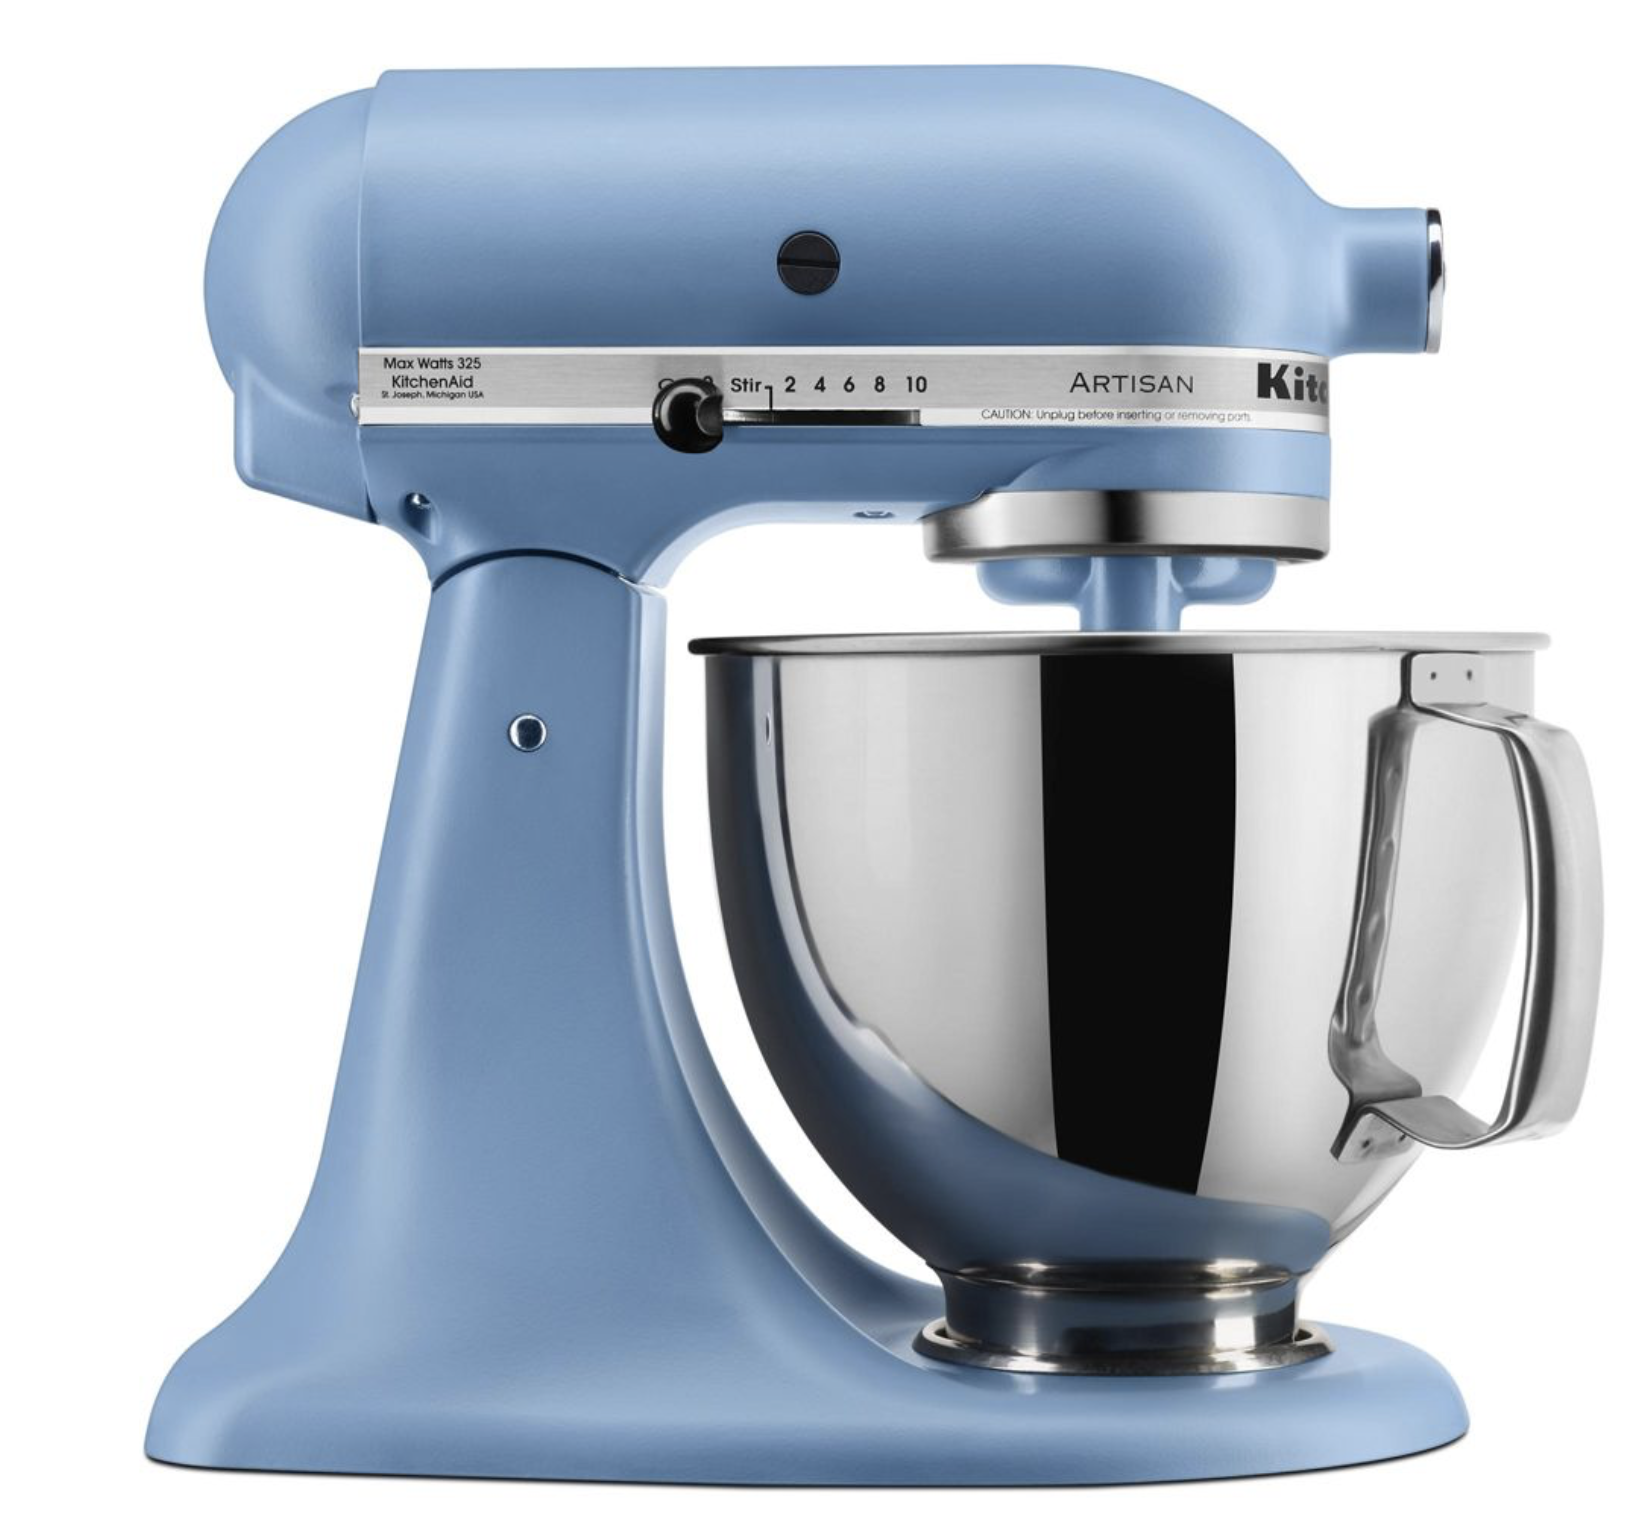 Deconstructing KitchenAid's greenwashed response to findings of